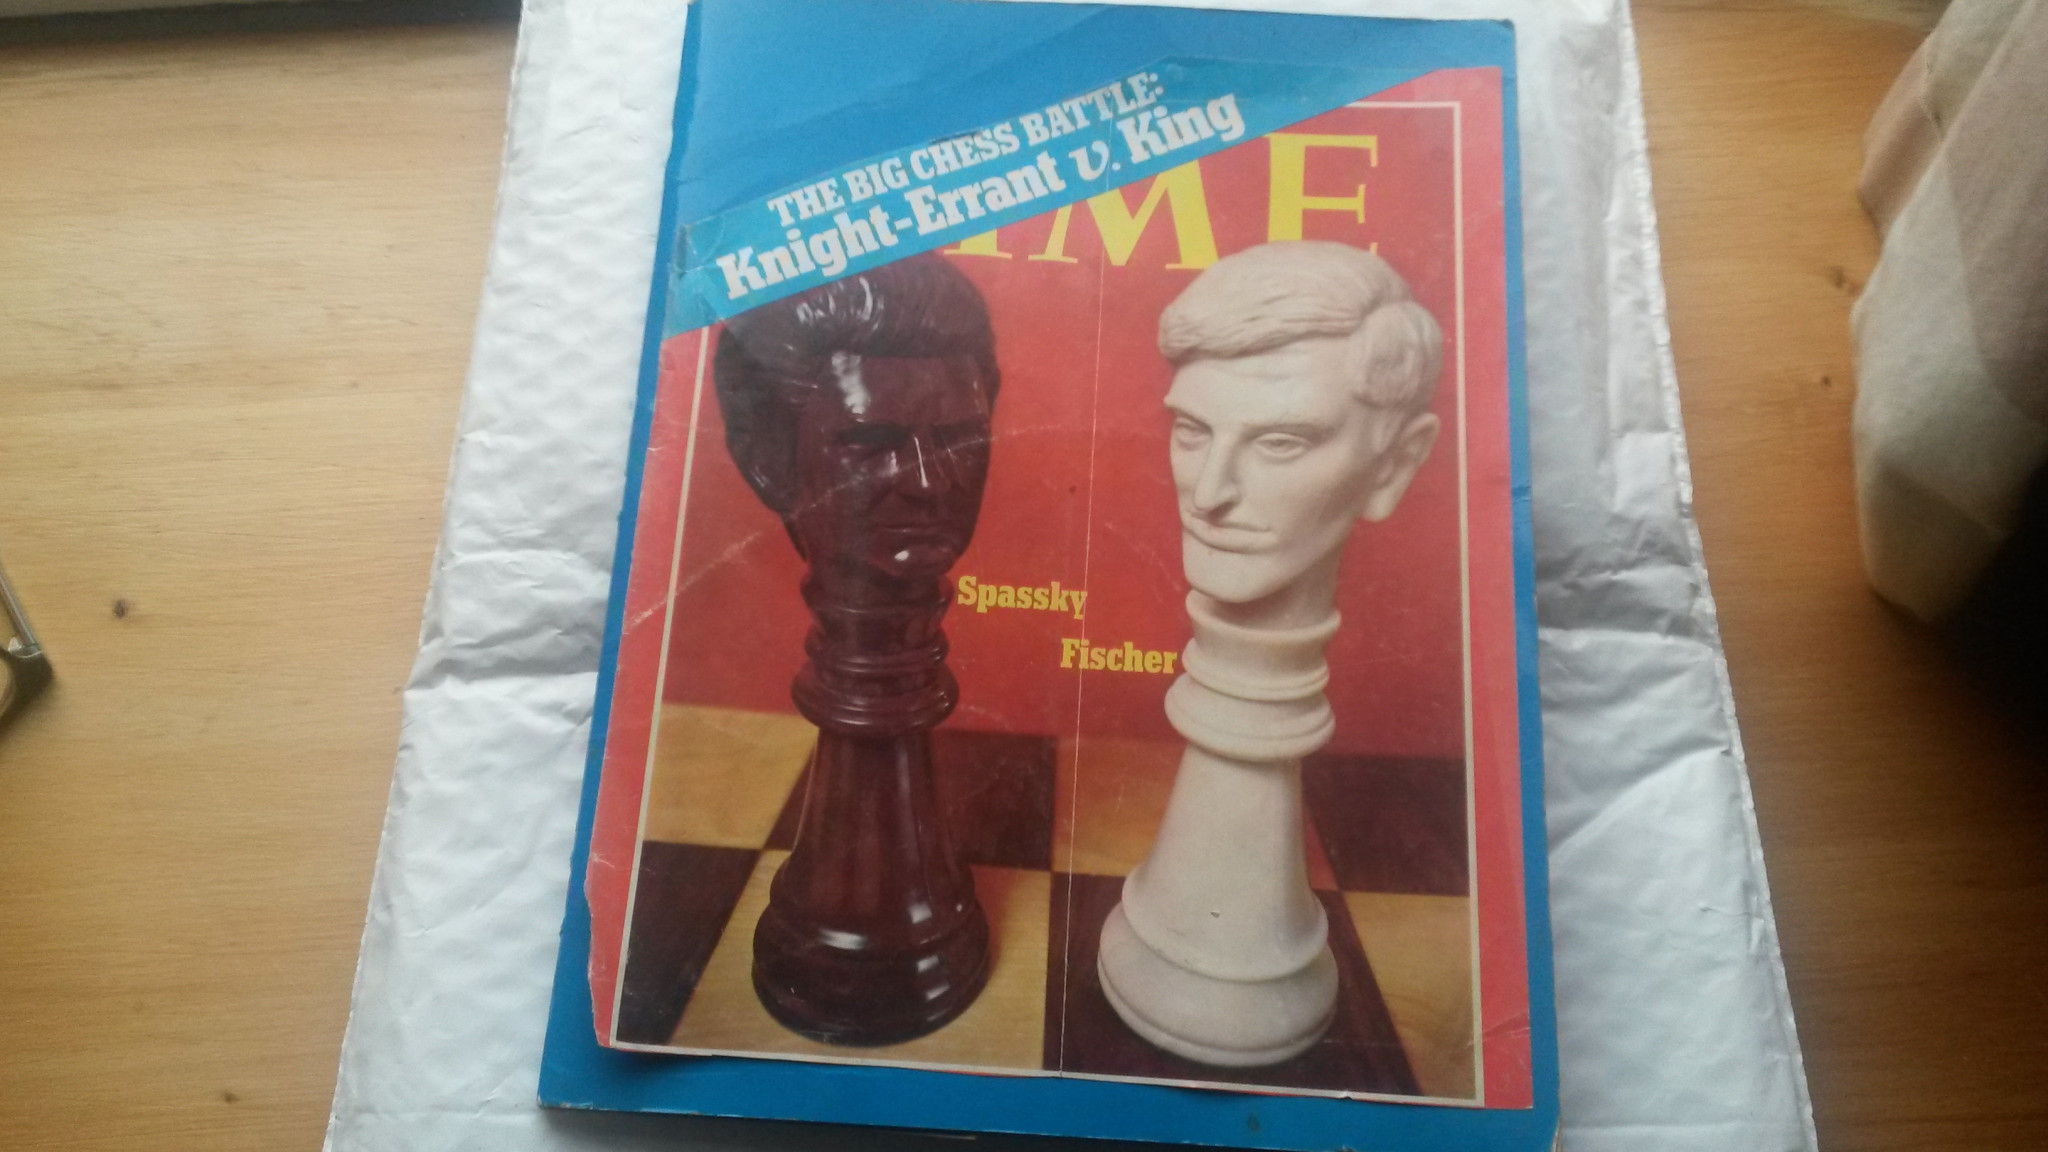 How Time viewed the impending chess 